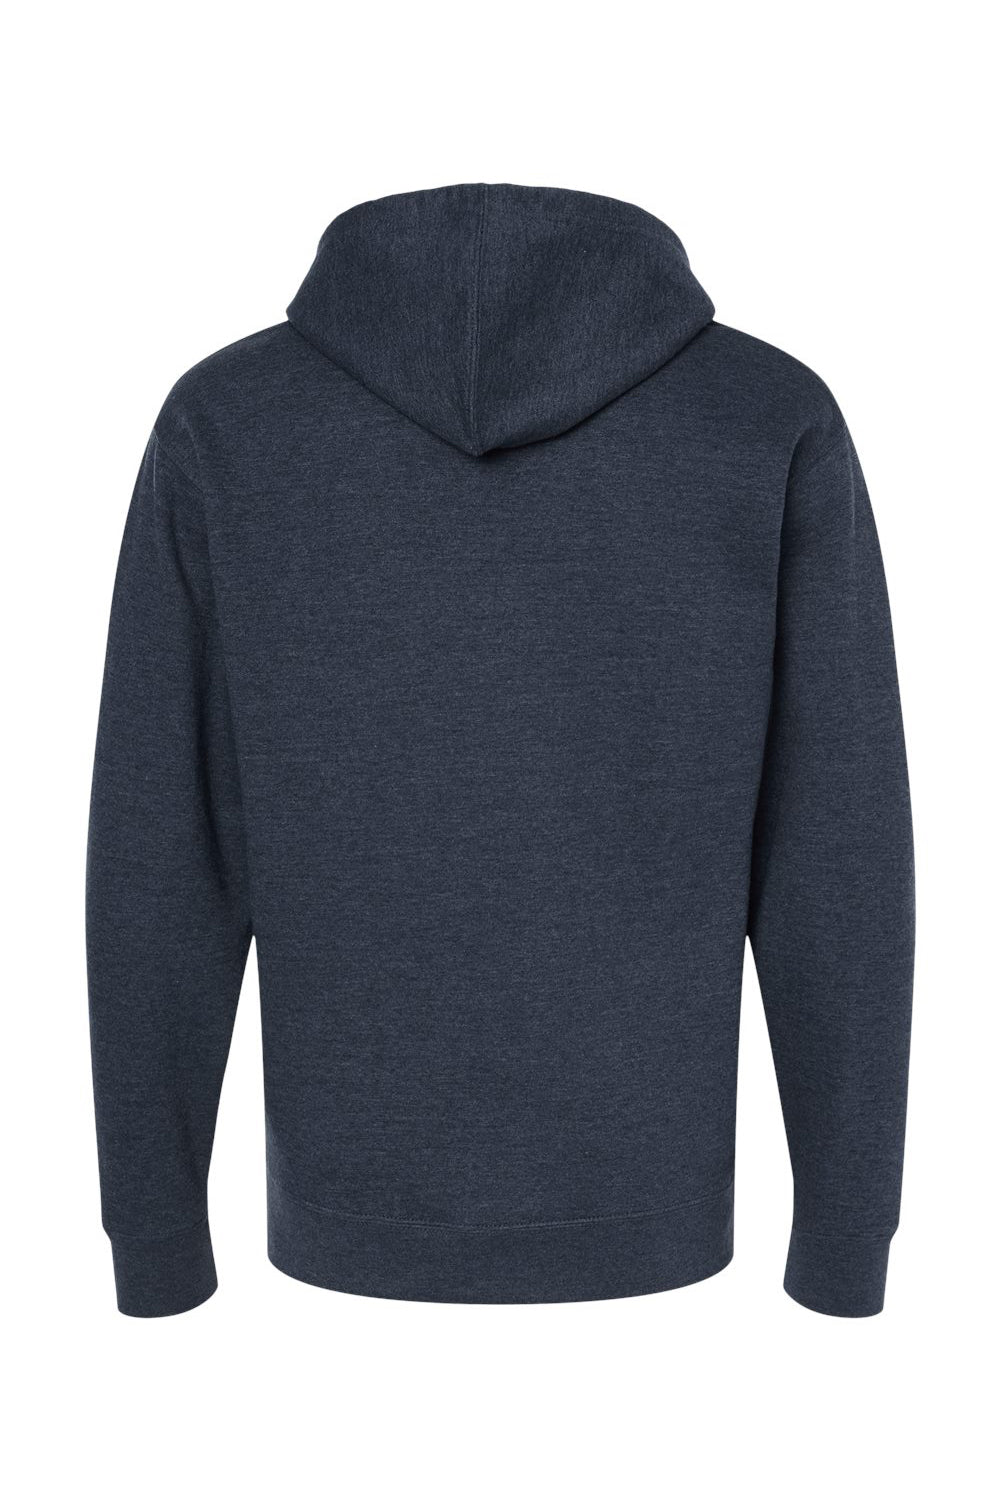 Independent Trading Co. SS4500Z Mens Full Zip Hooded Sweatshirt Hoodie Heather Classic Navy Blue Flat Back